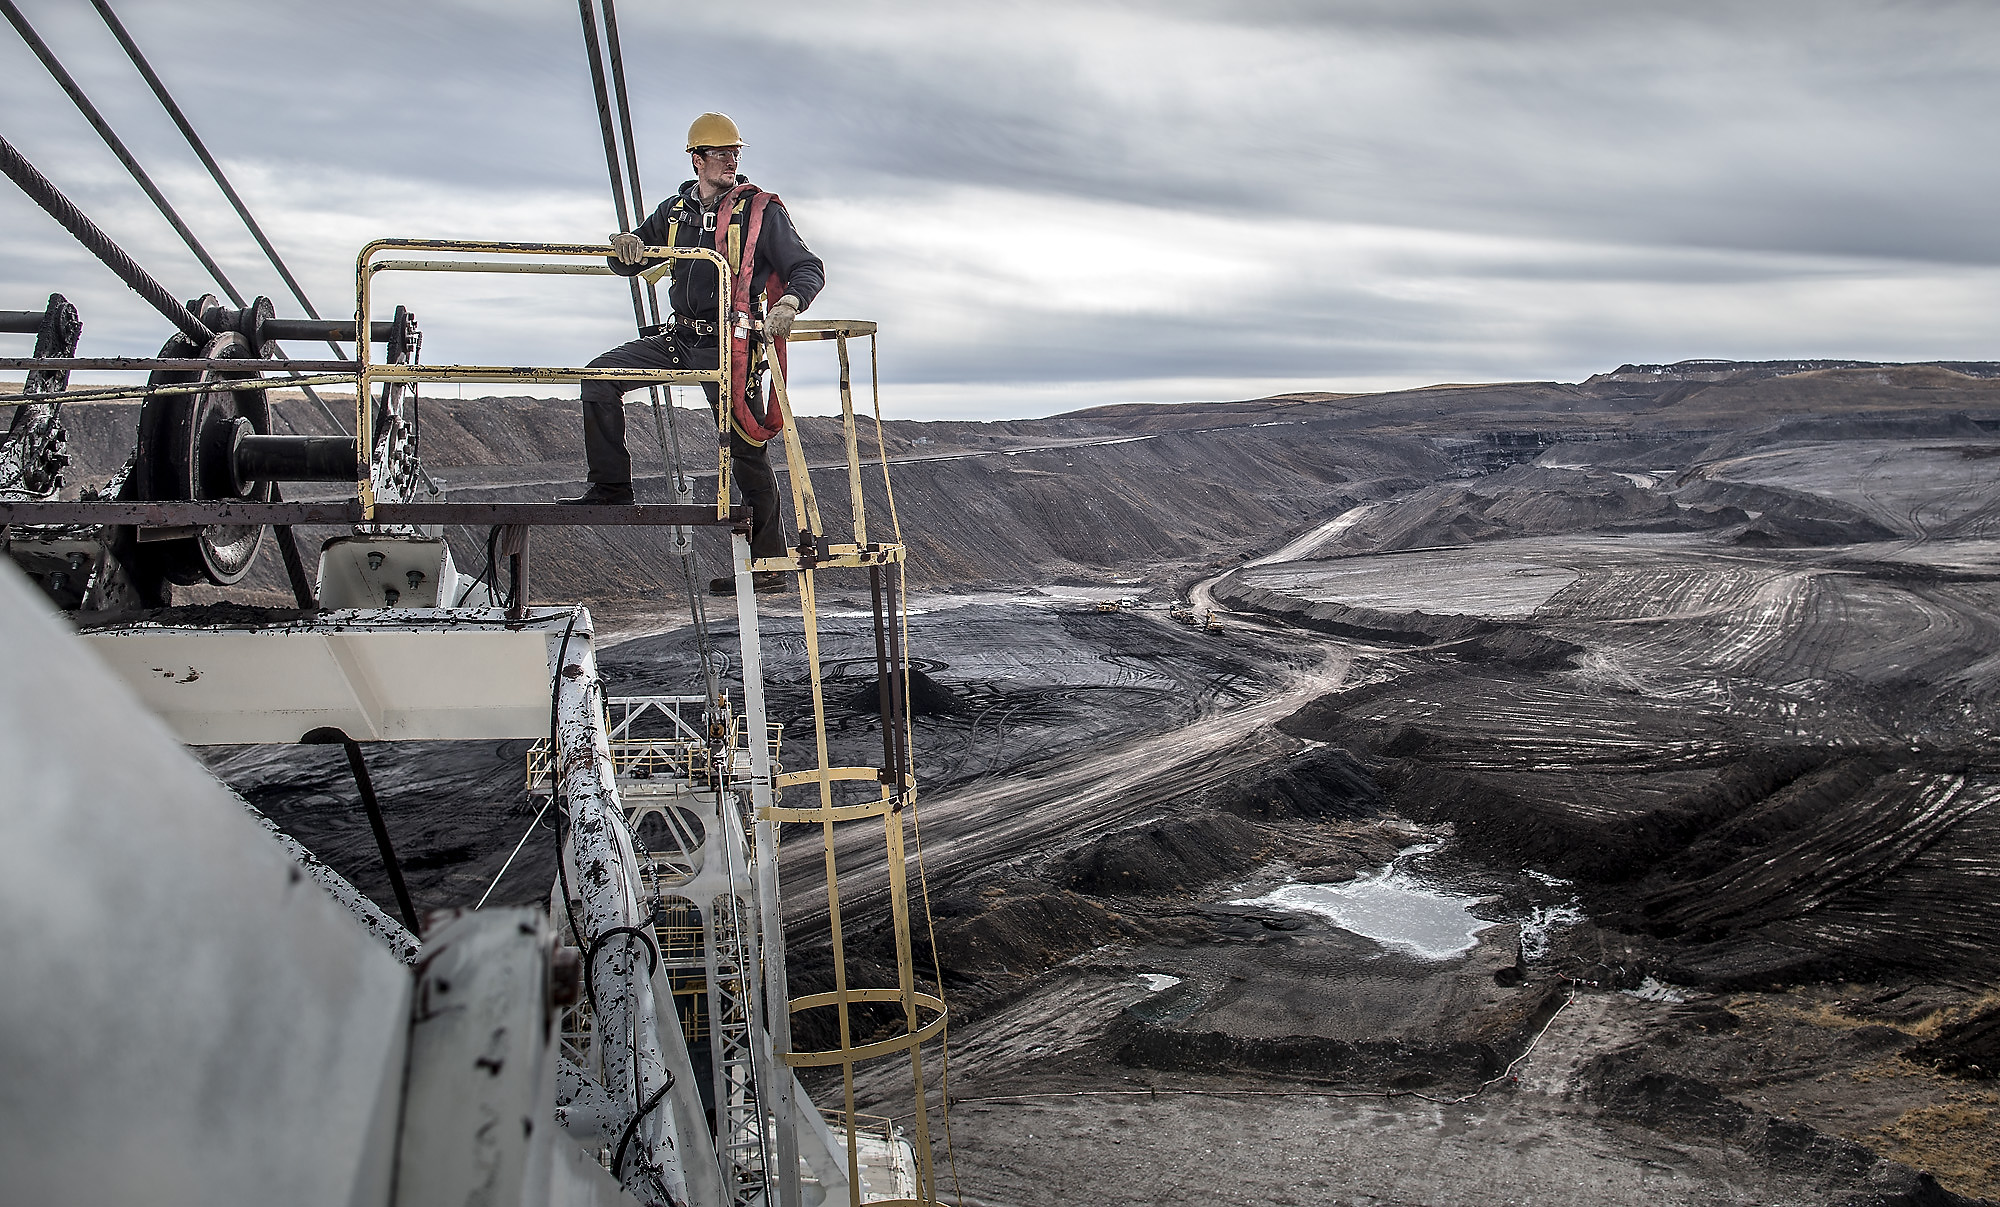 In Colorado, an Open Pit Coal Mine is the Backdrop for this Workwear Photo Ad Campaign. A Professional Photographer Captures the Grit and Hard Work Necessary.